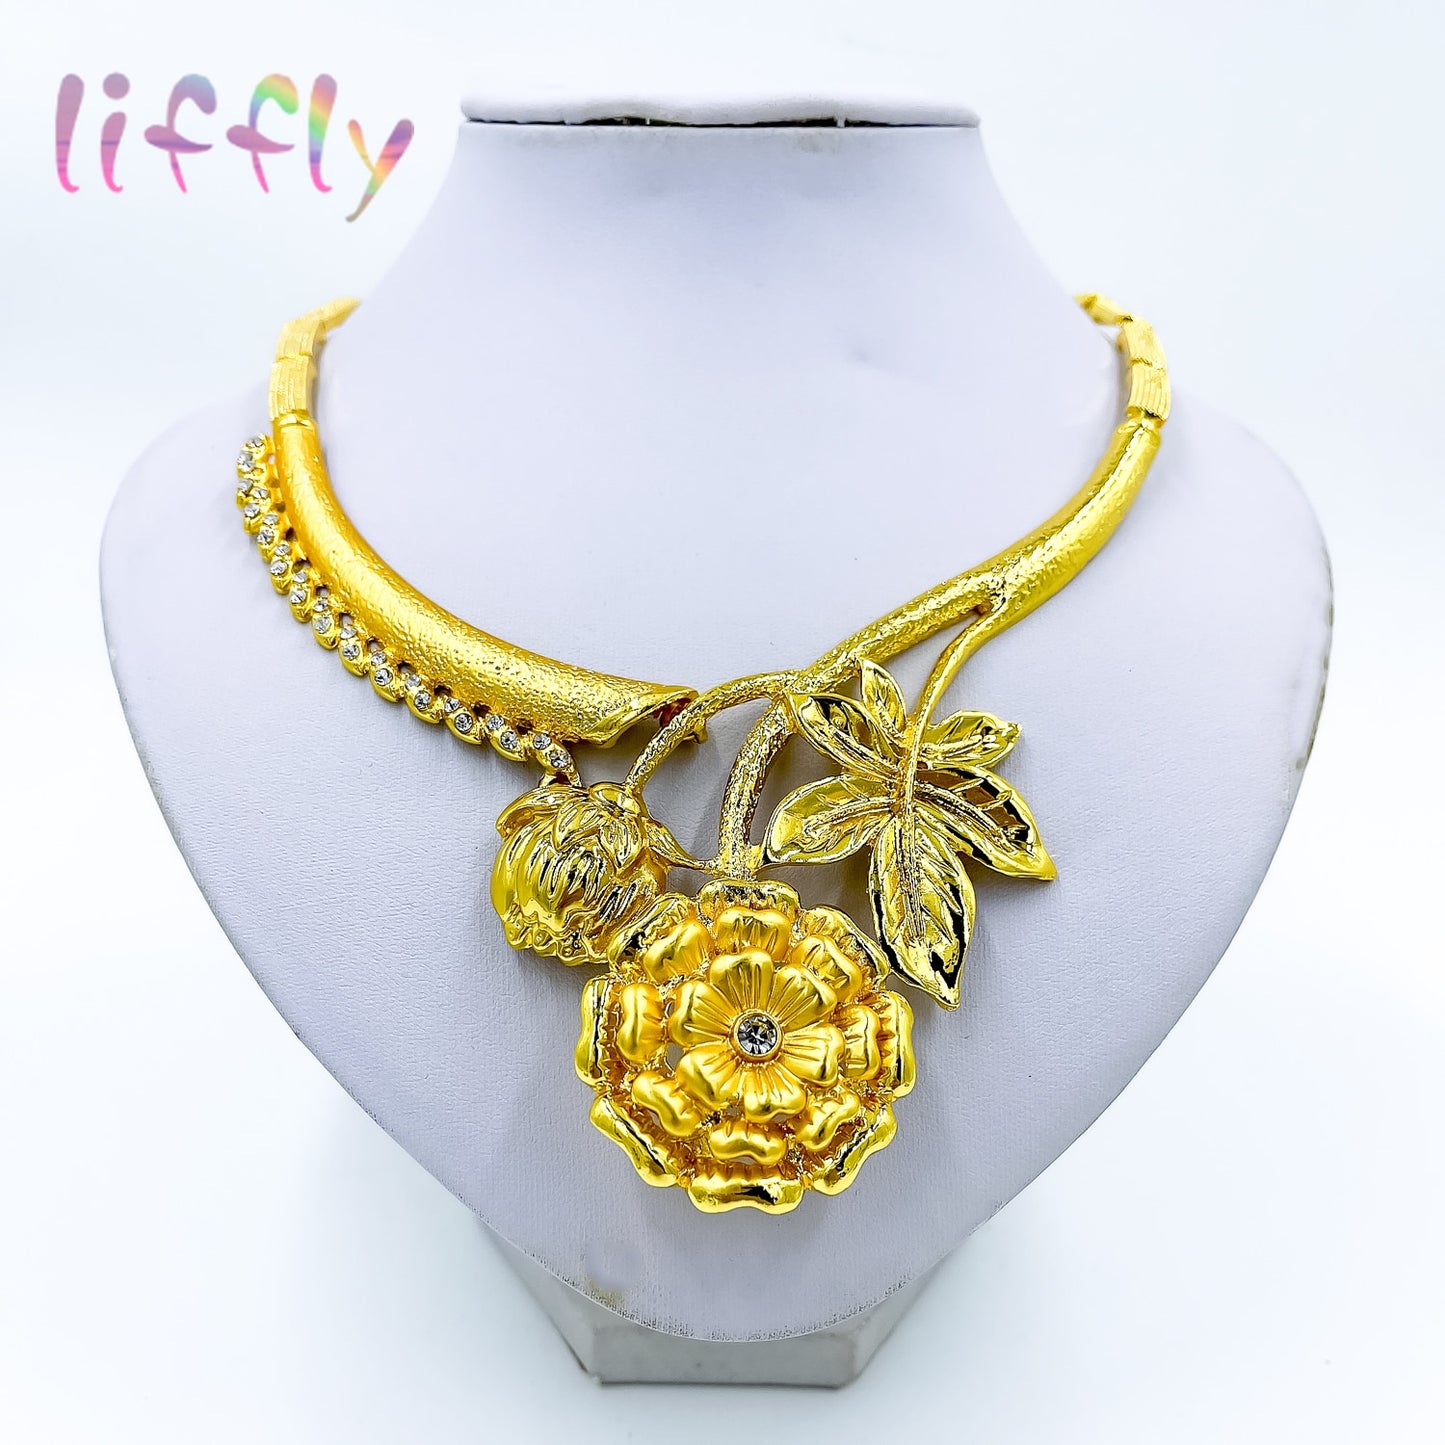 Liffly New Indian Wedding Jewelry Flower Necklace Bracelet Earrings Ring Fashion Jewelry Sets Women Party Gift